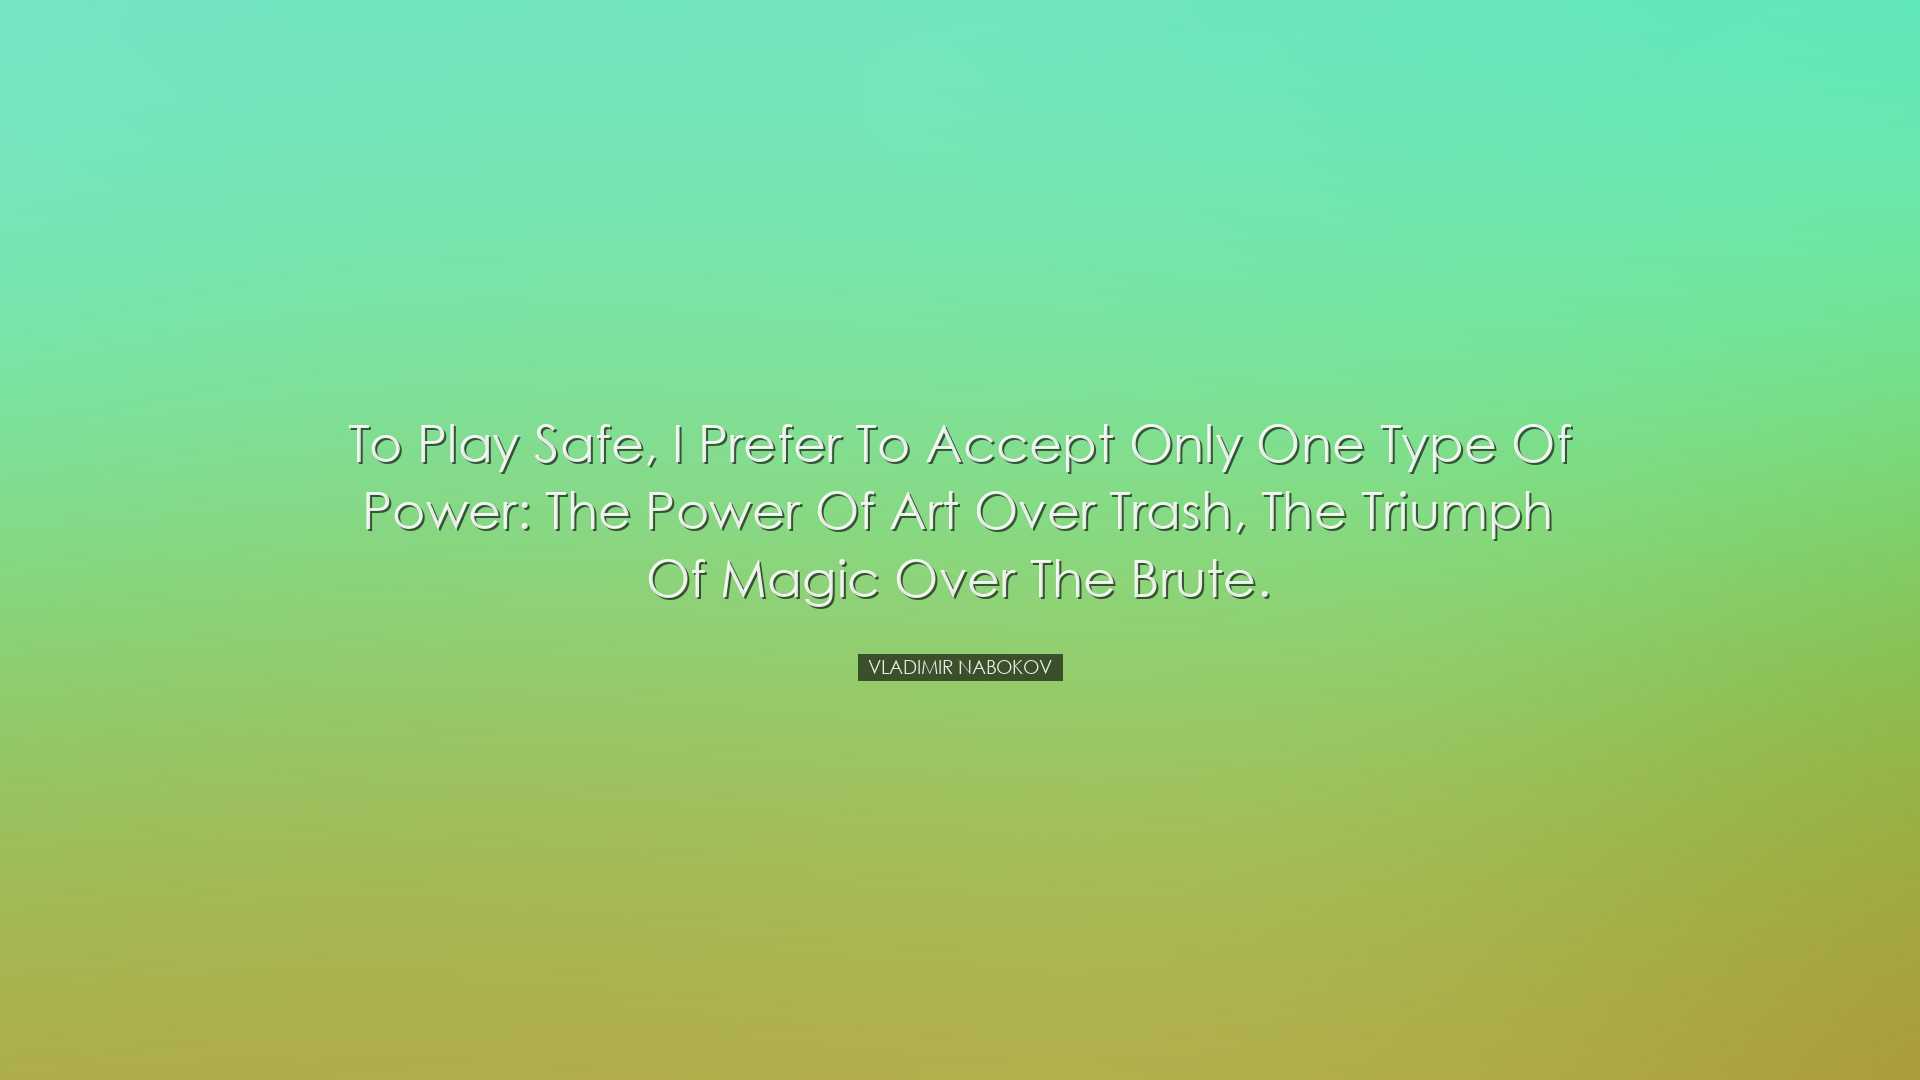 To play safe, I prefer to accept only one type of power: the power